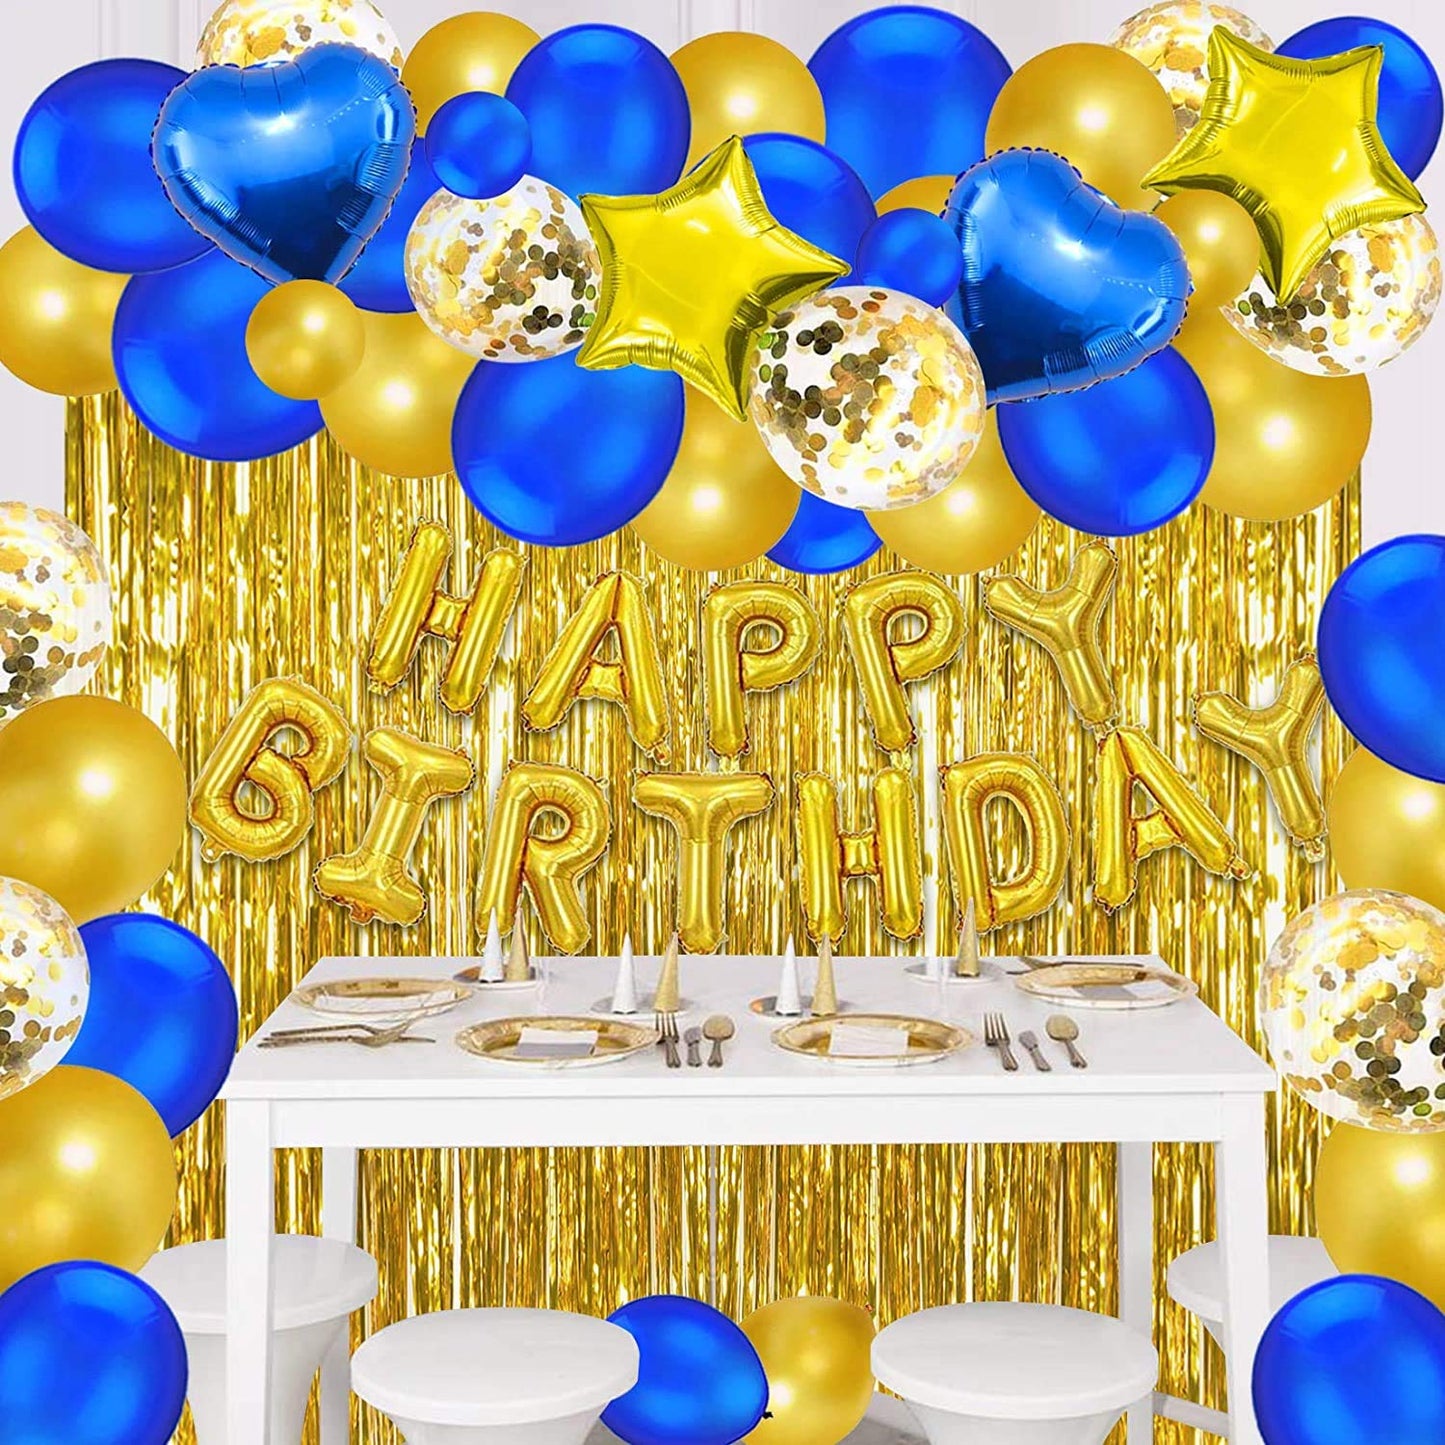 Golden and Blue Decoration Items - Pack of 44 Pcs - CherishX Partystore